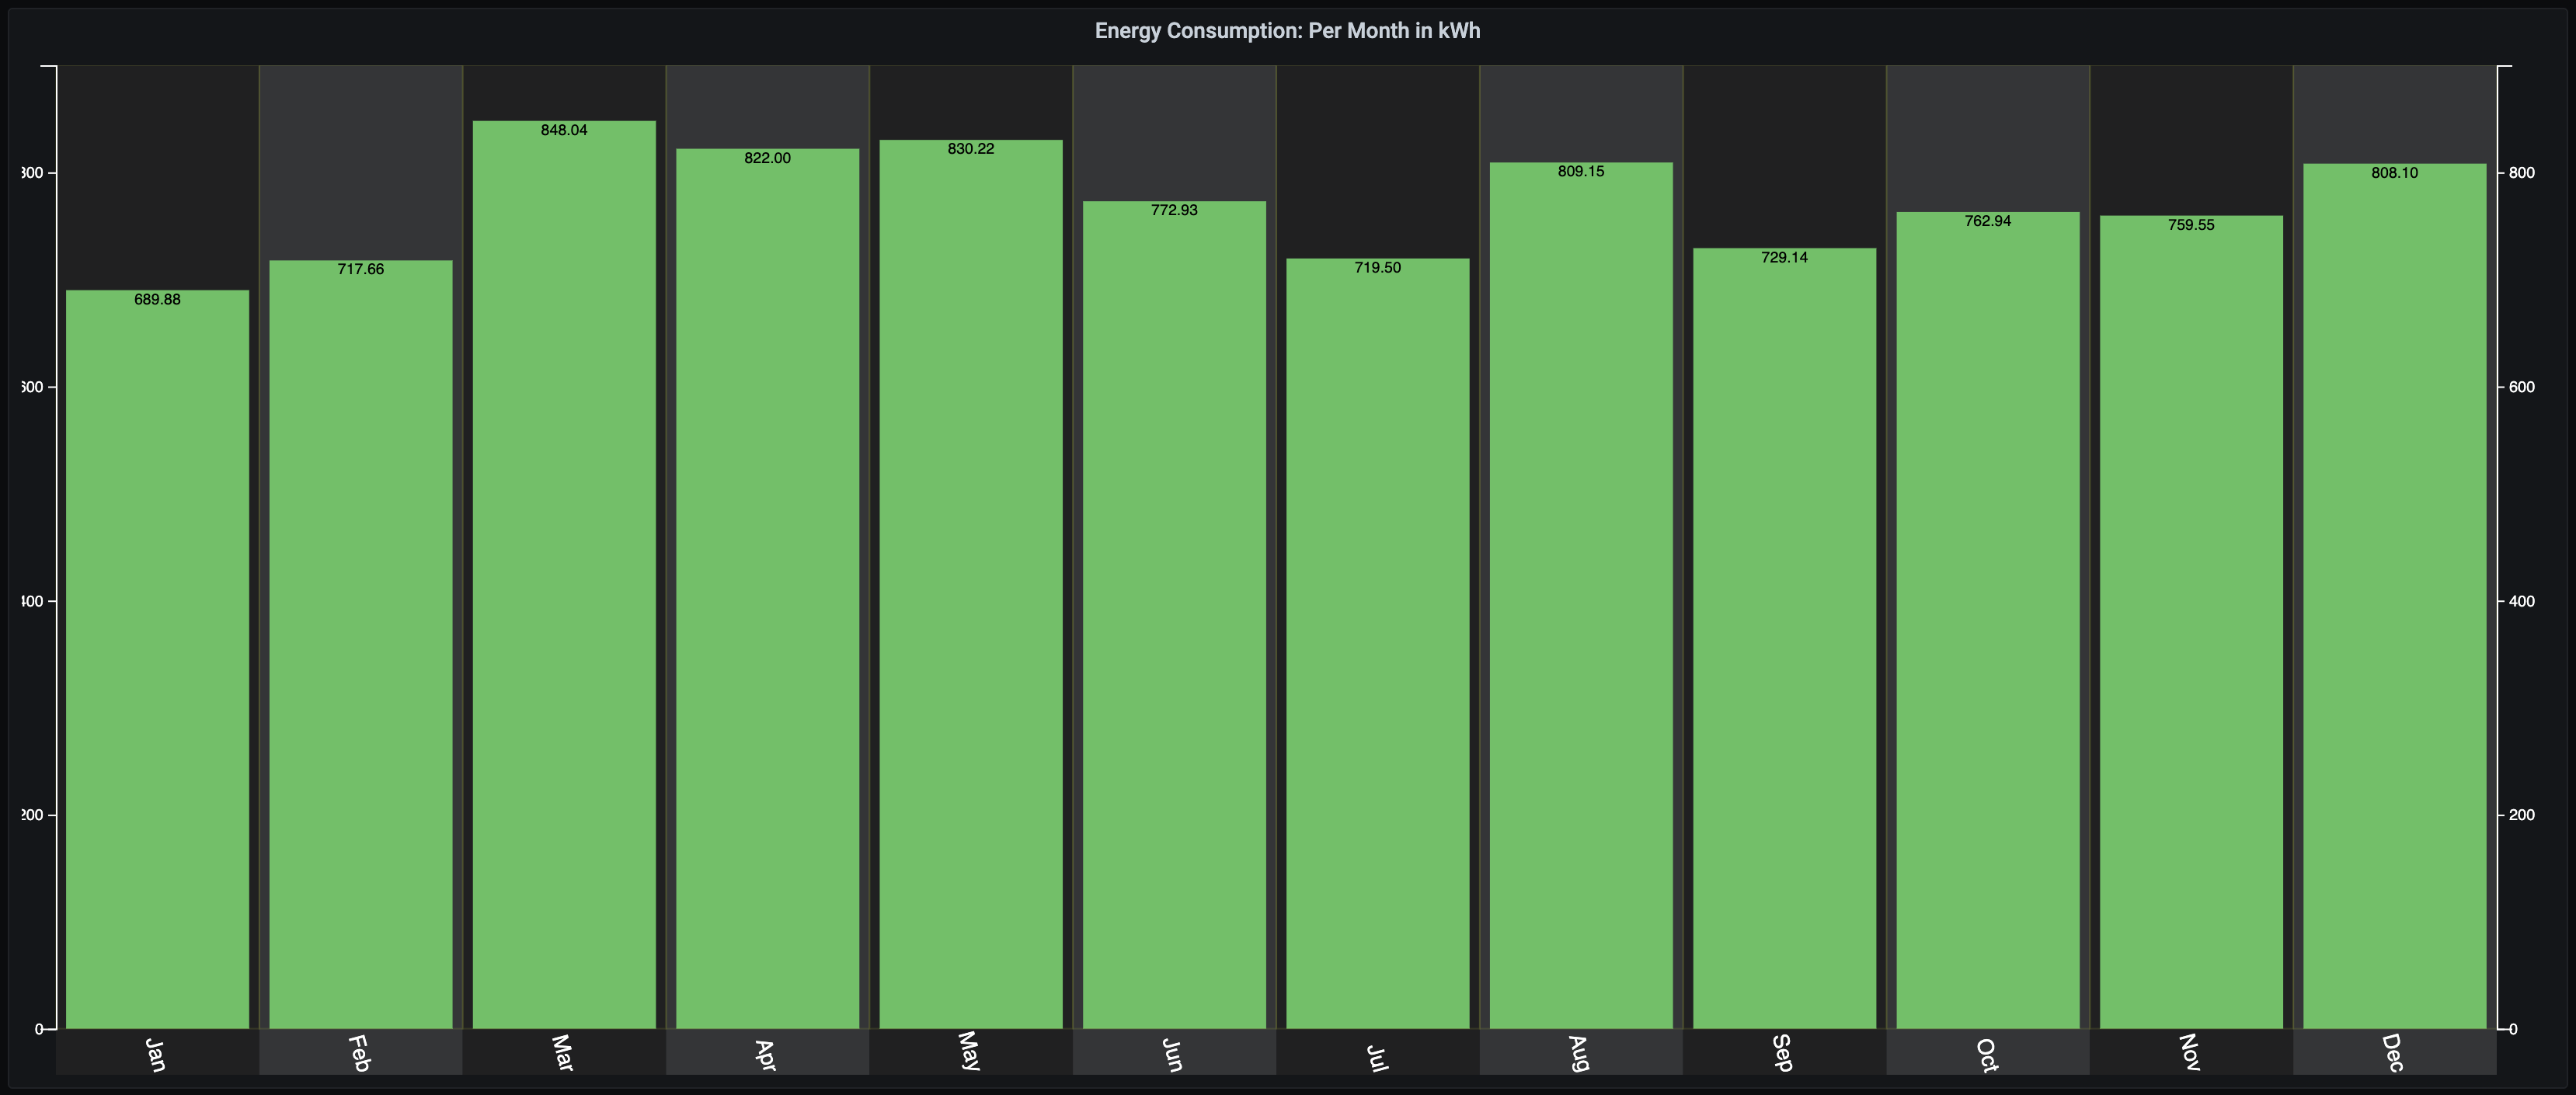 Energy consumption per month in kWh (bar chart with green bars over a black background)